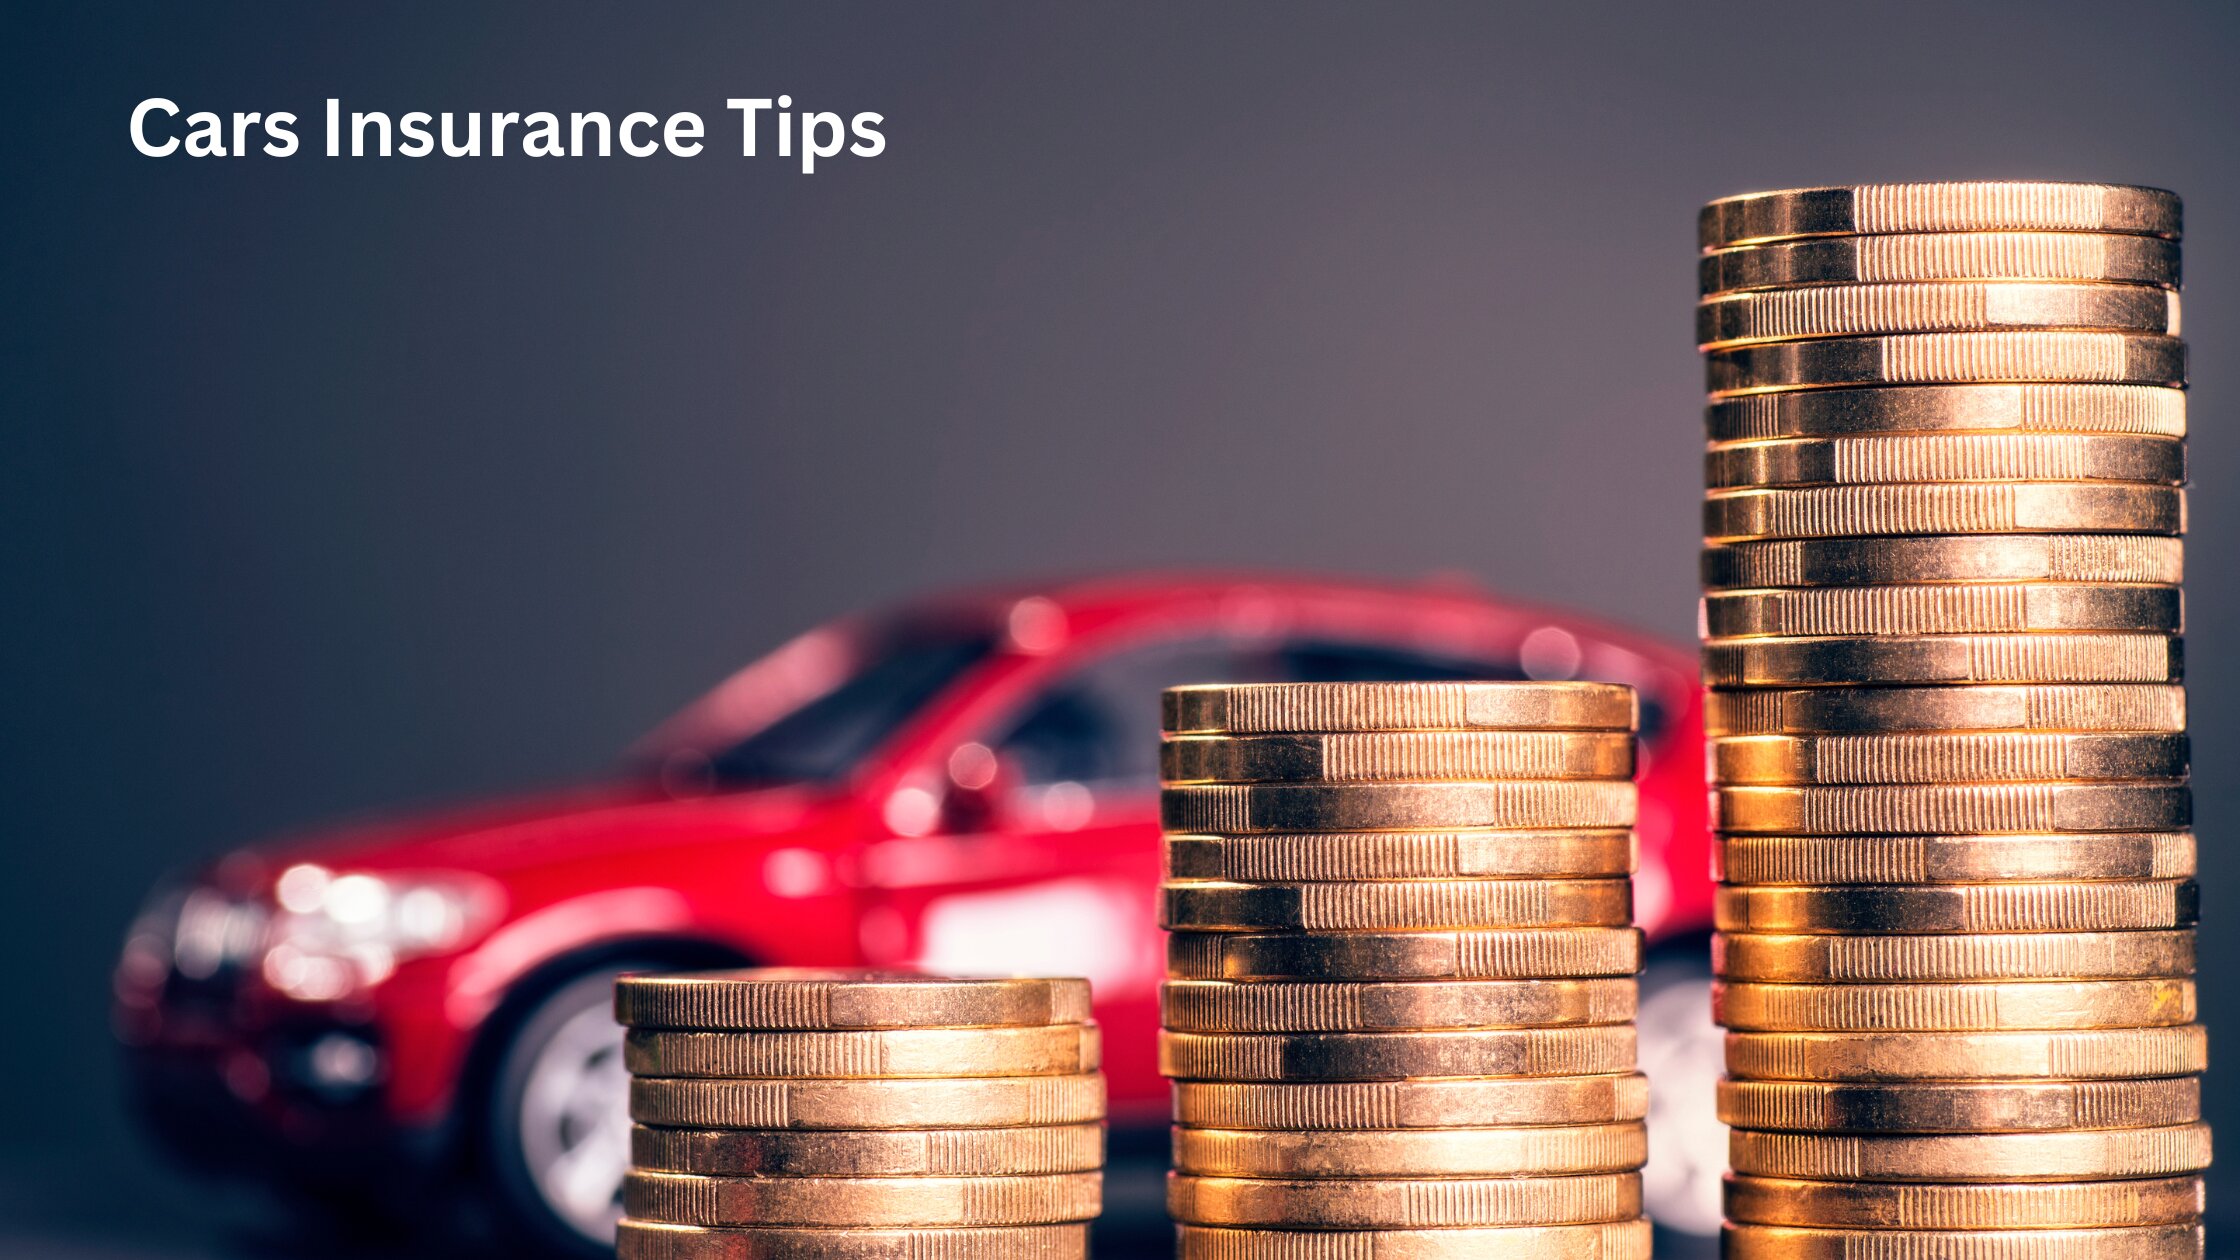 Monthly Car Insurance Costs